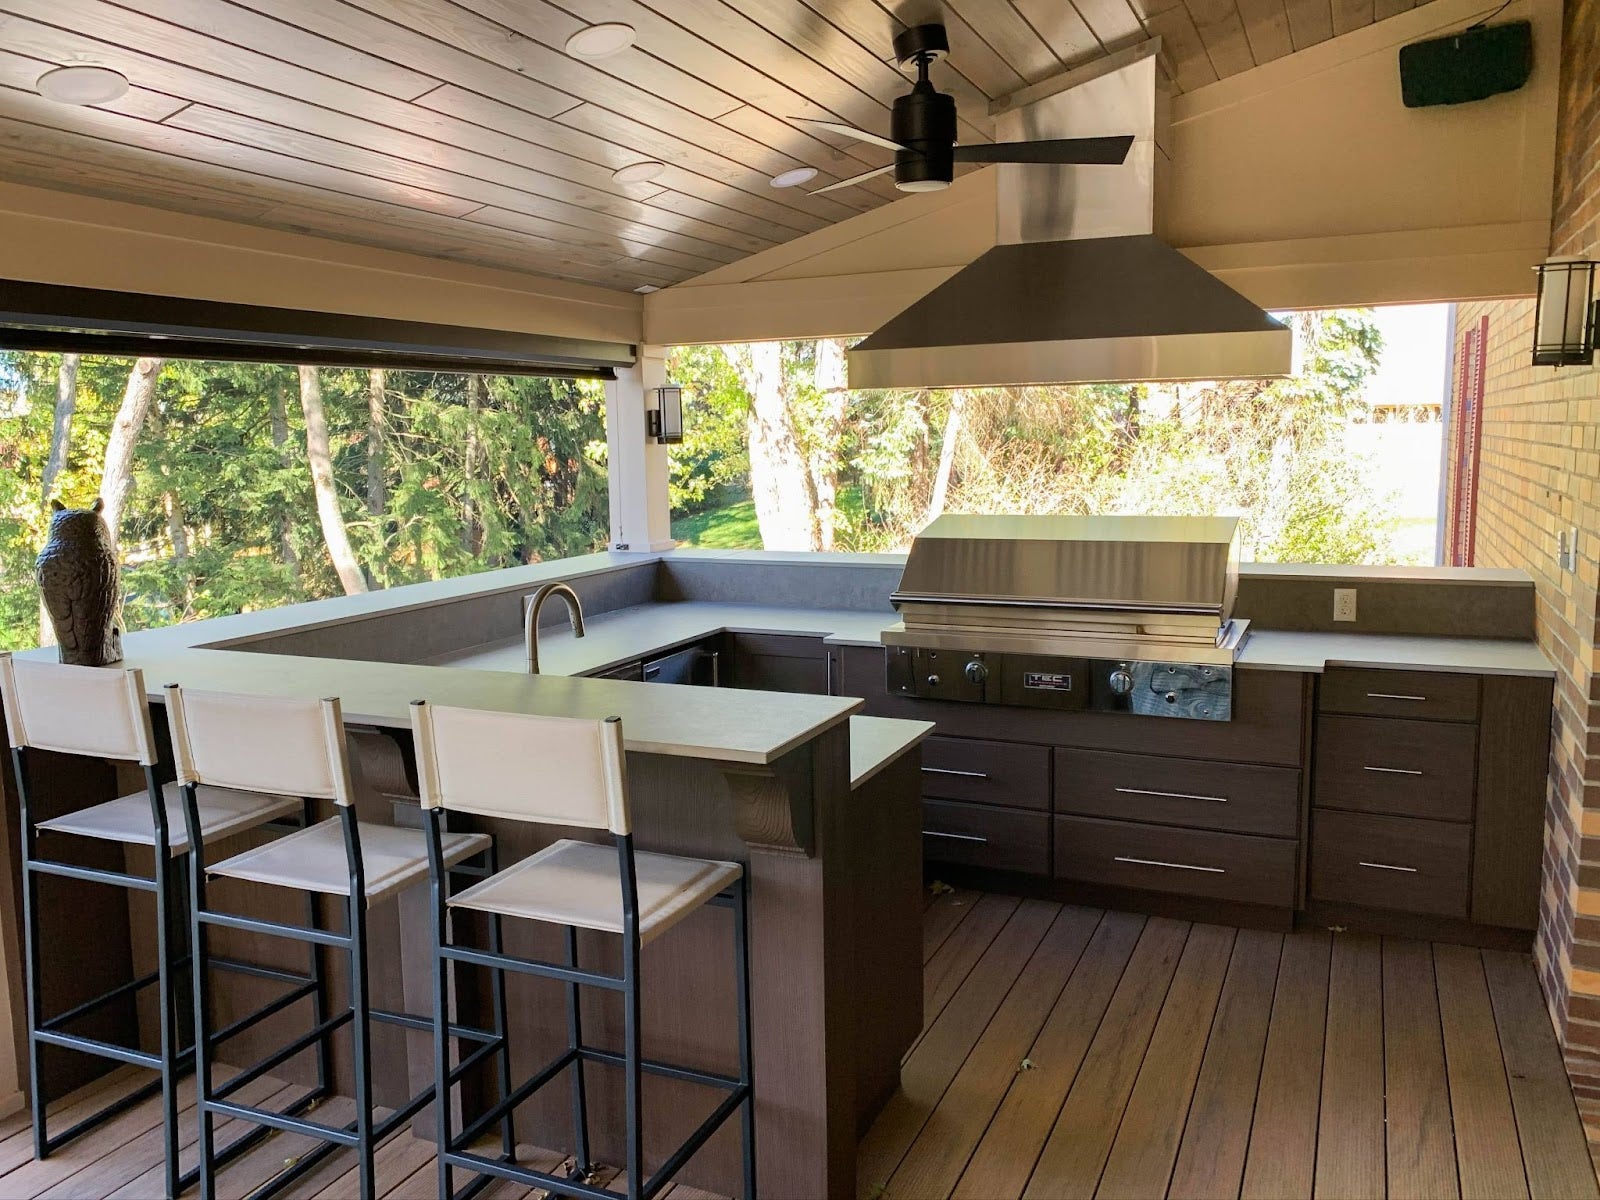 Contemporary outdoor cooking space with a built-in grill, sleek countertops, and high stools, set against a natural wooded environment. - Proline Range Hoods - prolinerangehoods.com 